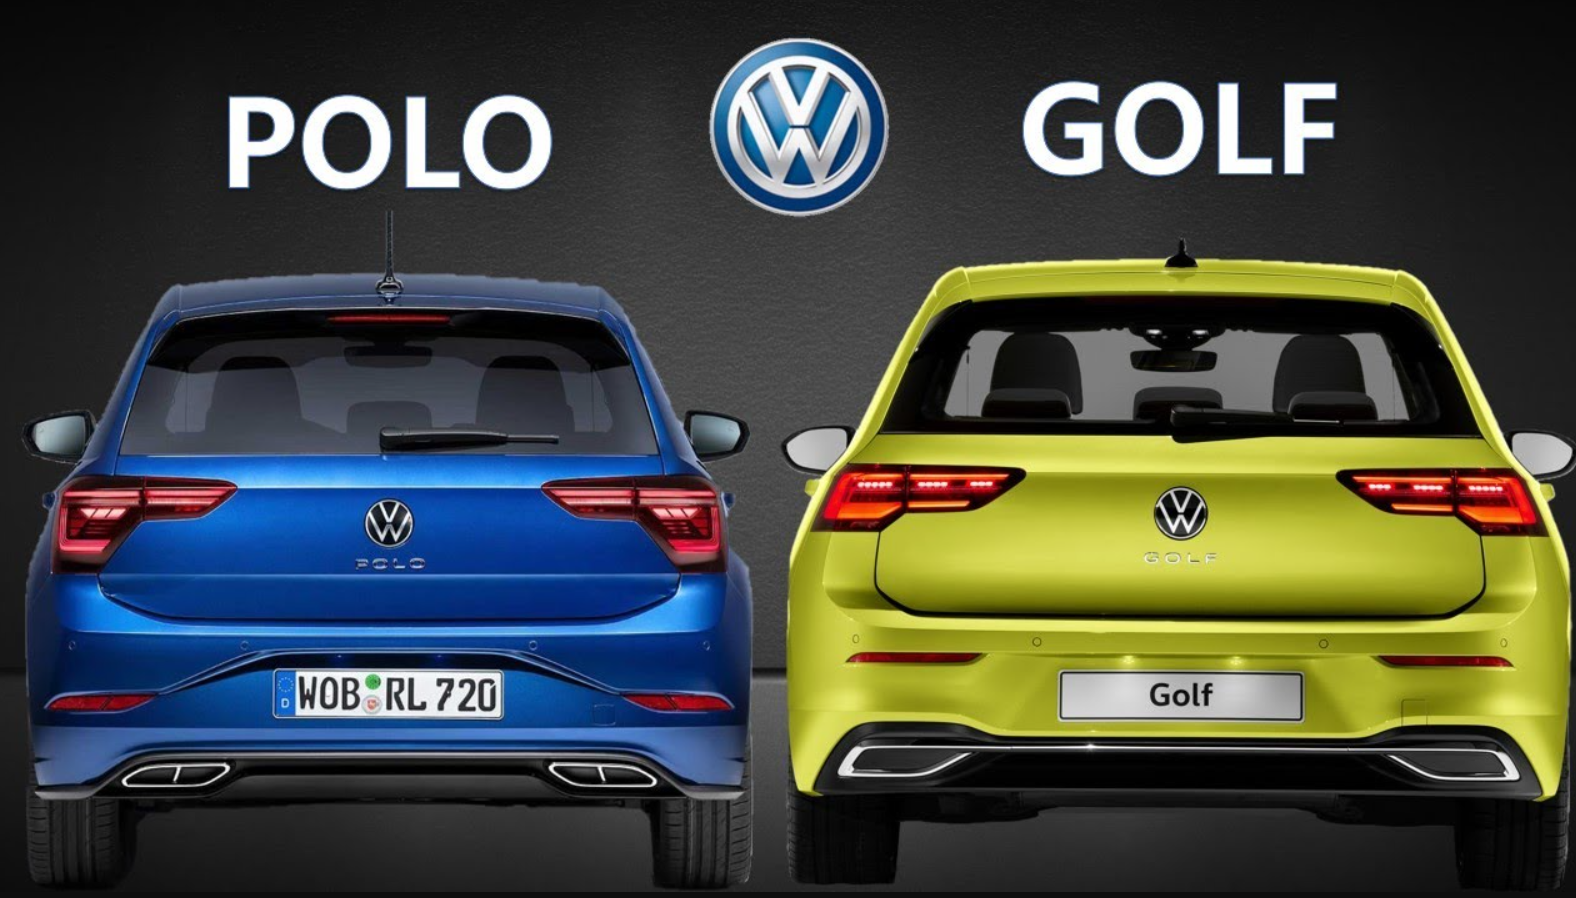 Dimensions of VW Golf Things to remember